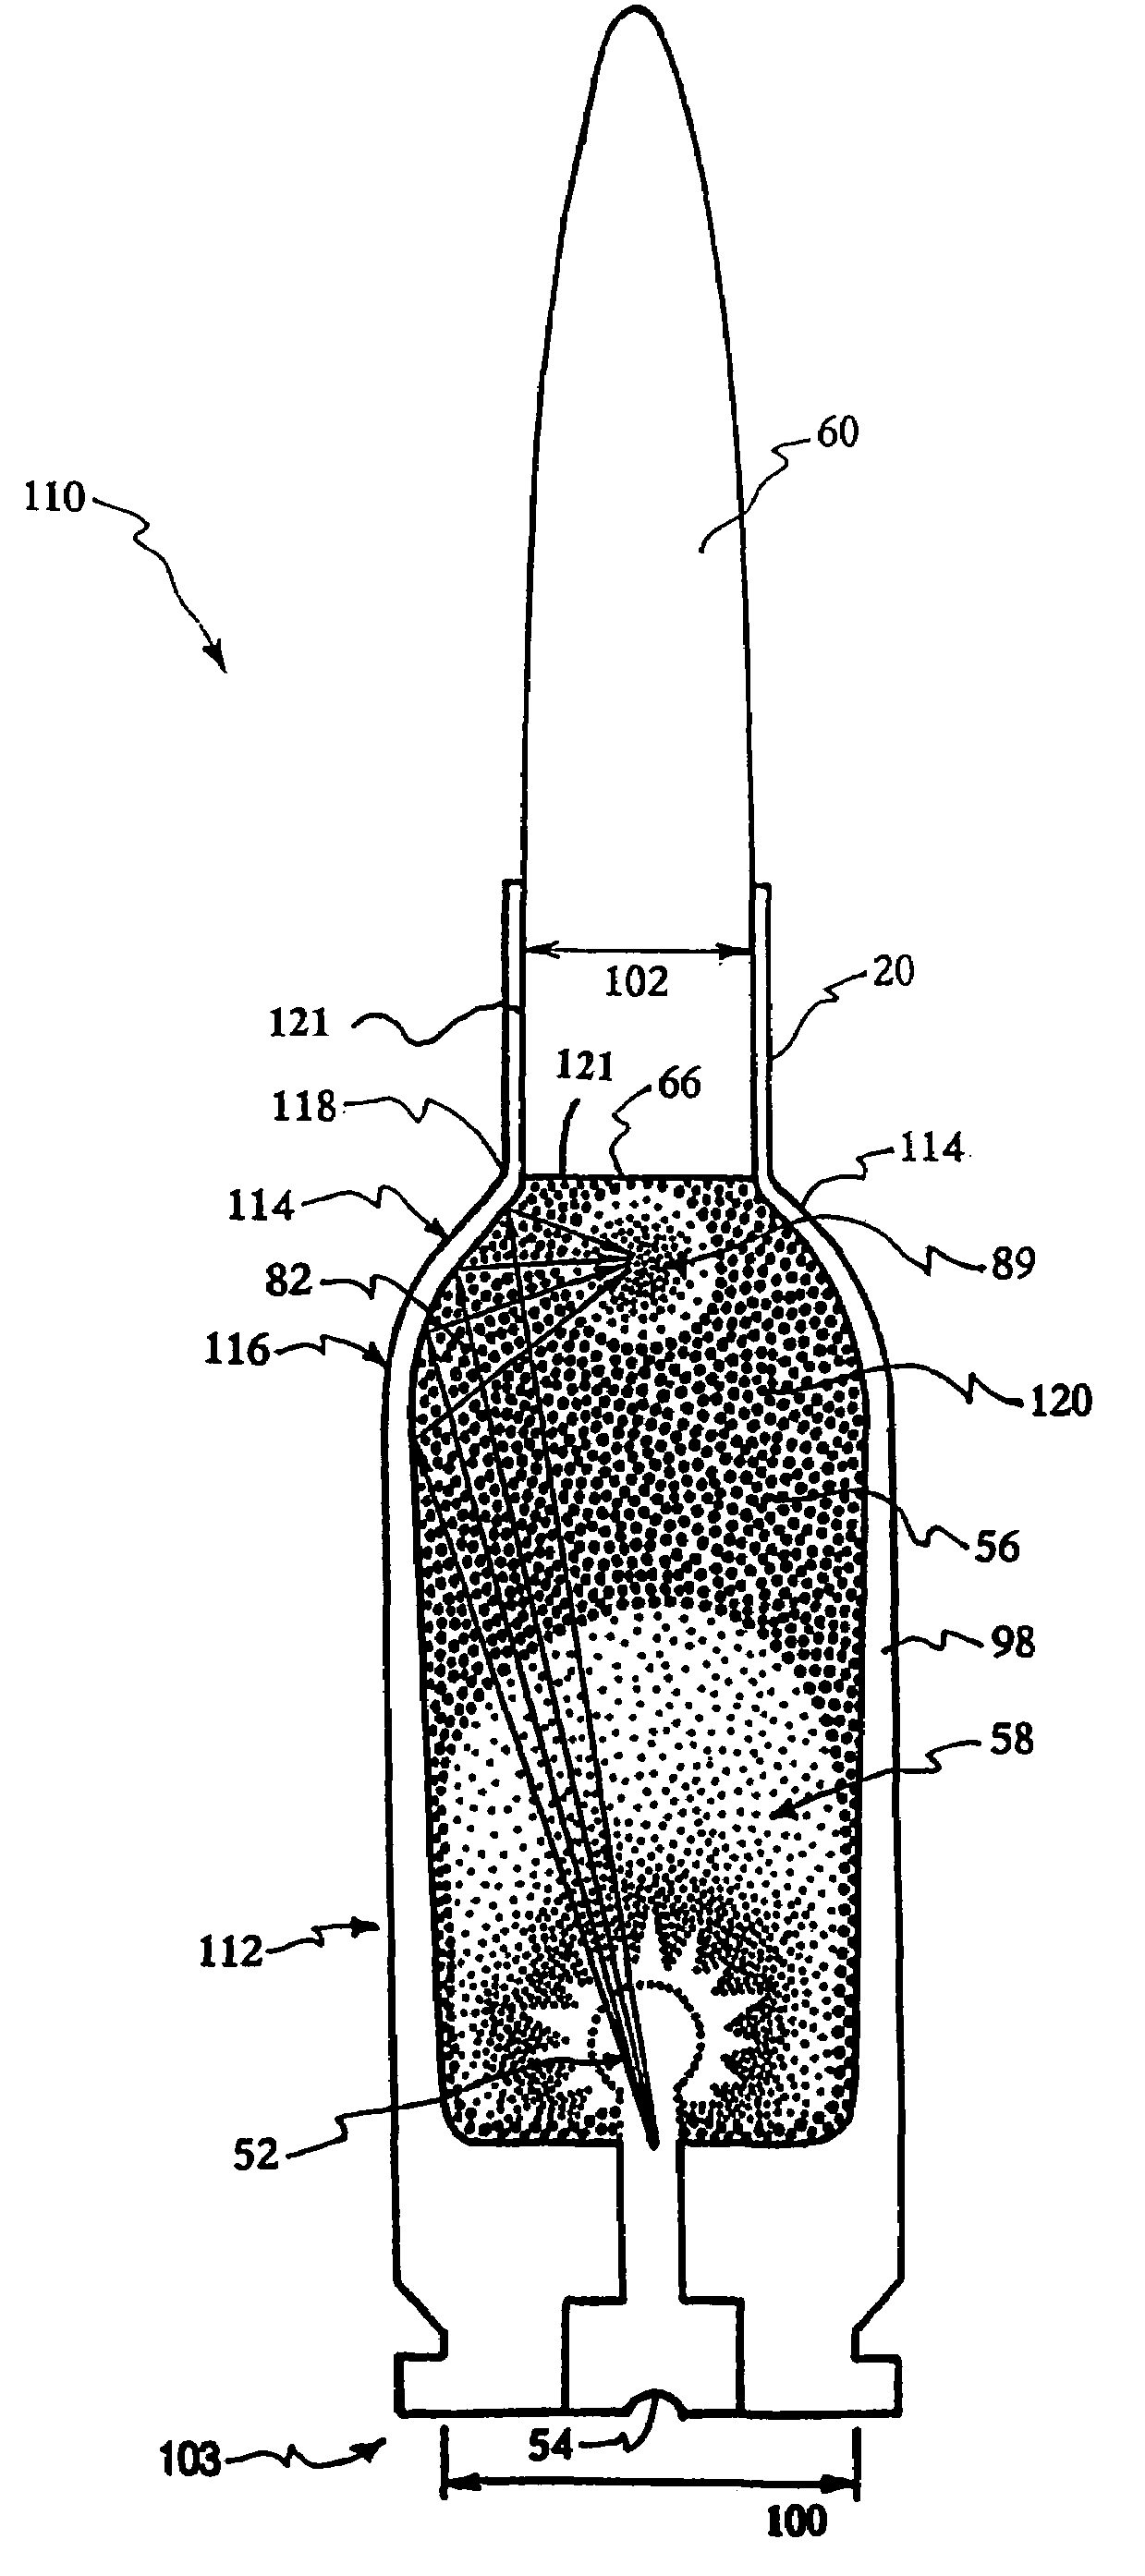 Firearm cartridge and case-less chamber